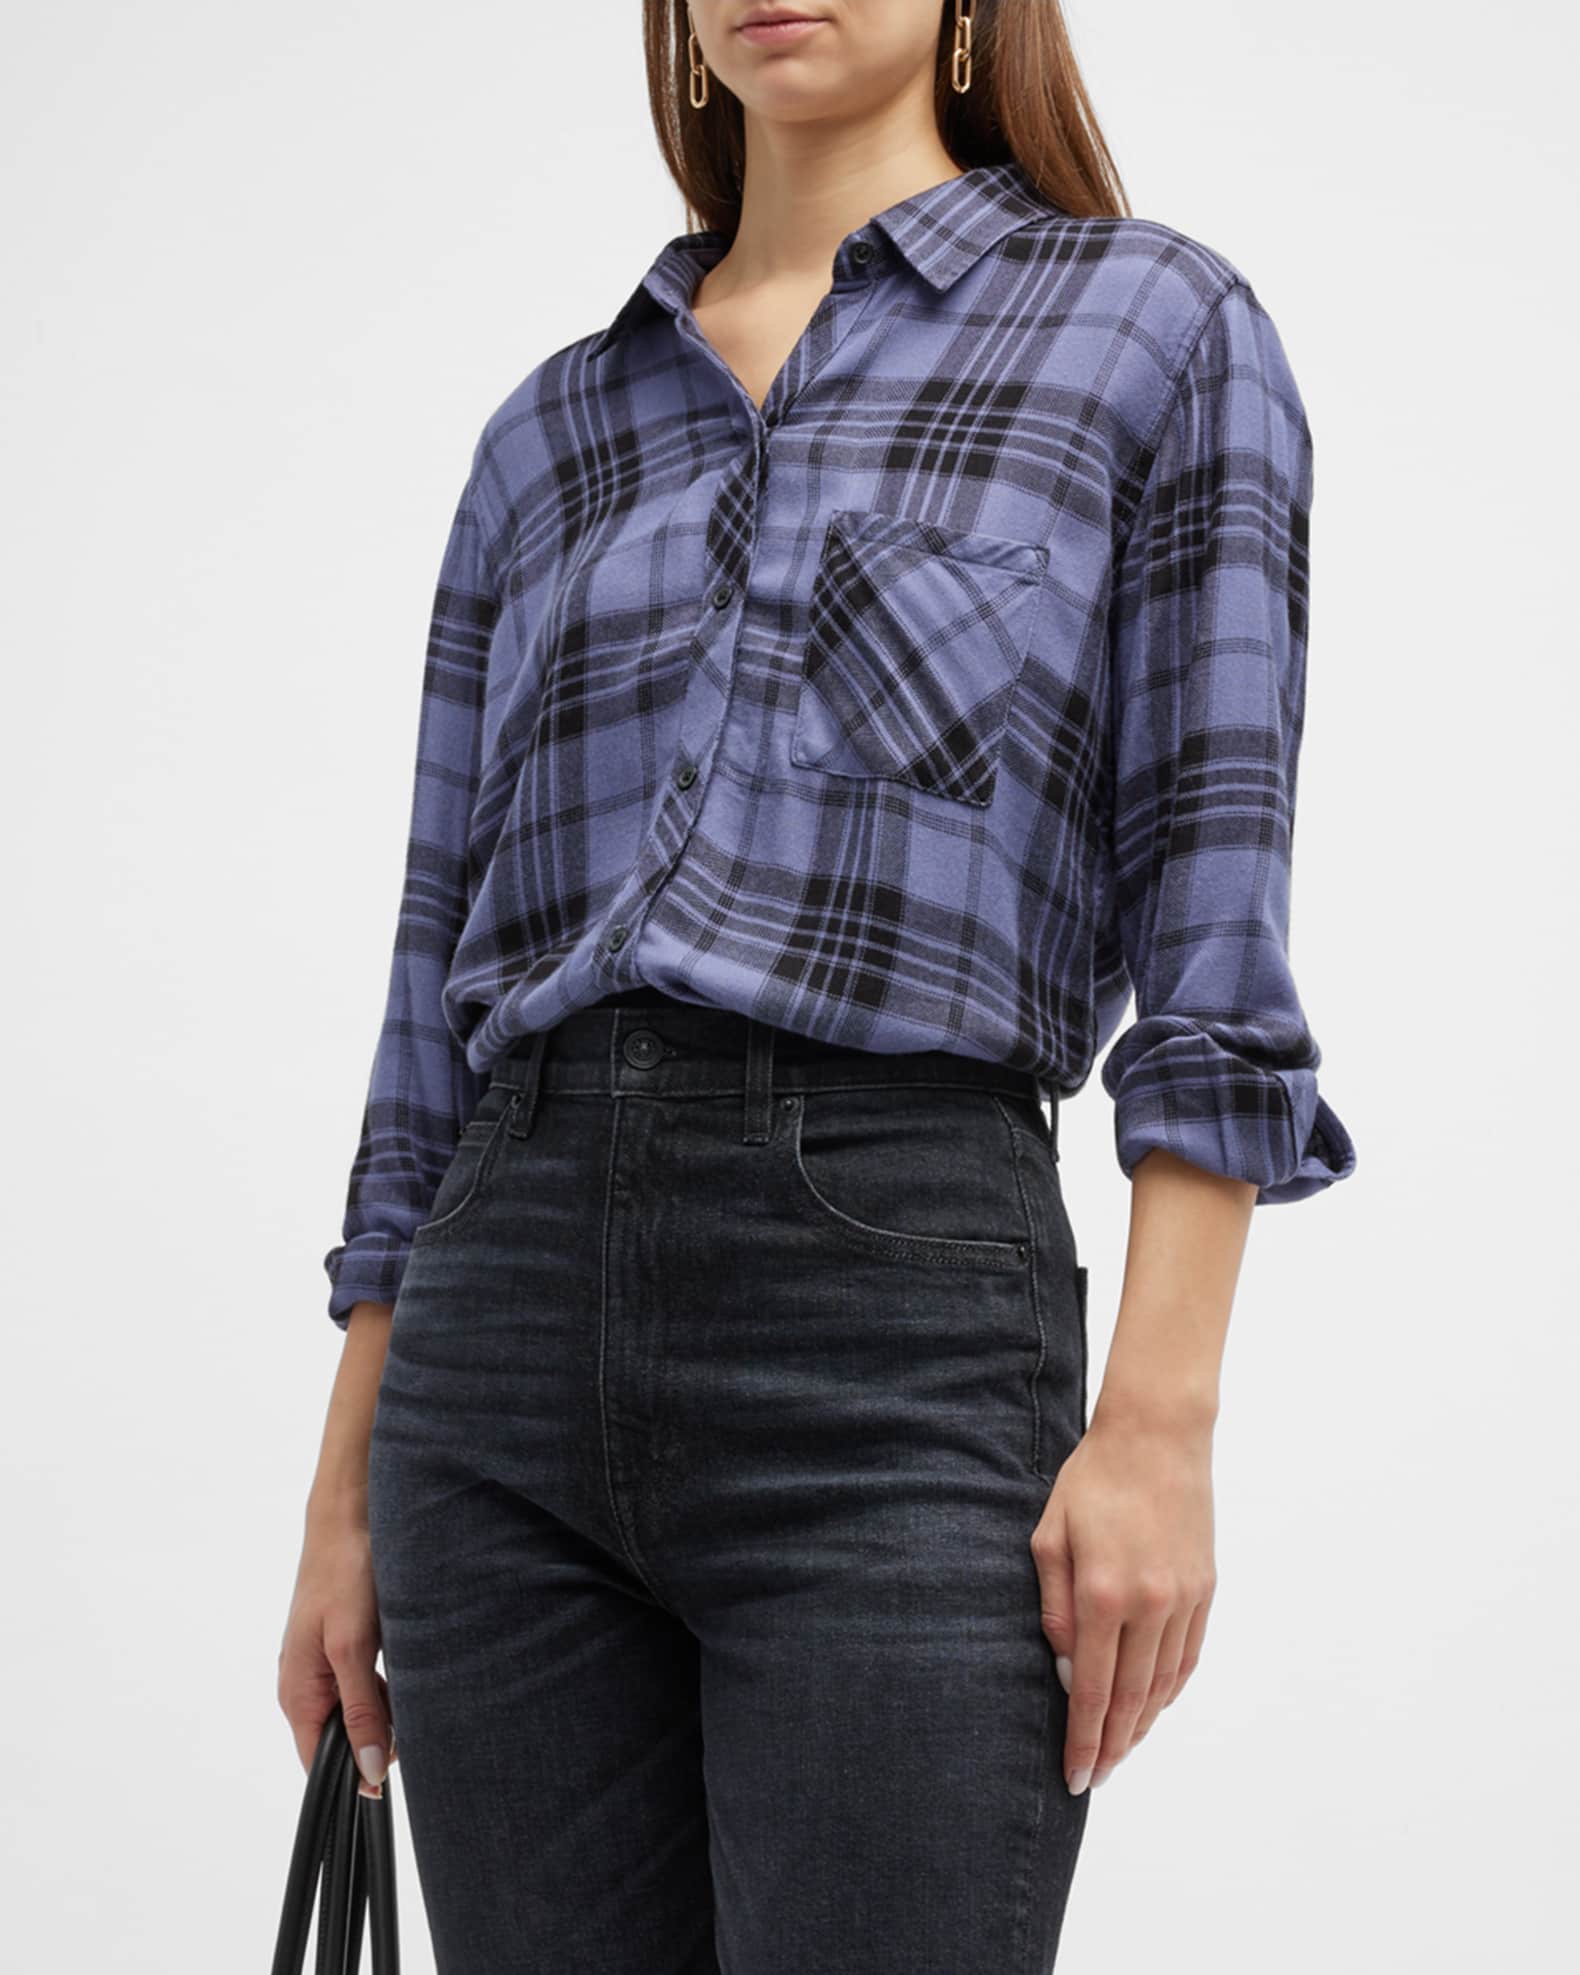 Fashion Blouses Checked Blouses Eterna Checked Blouse azure-white check pattern casual look 